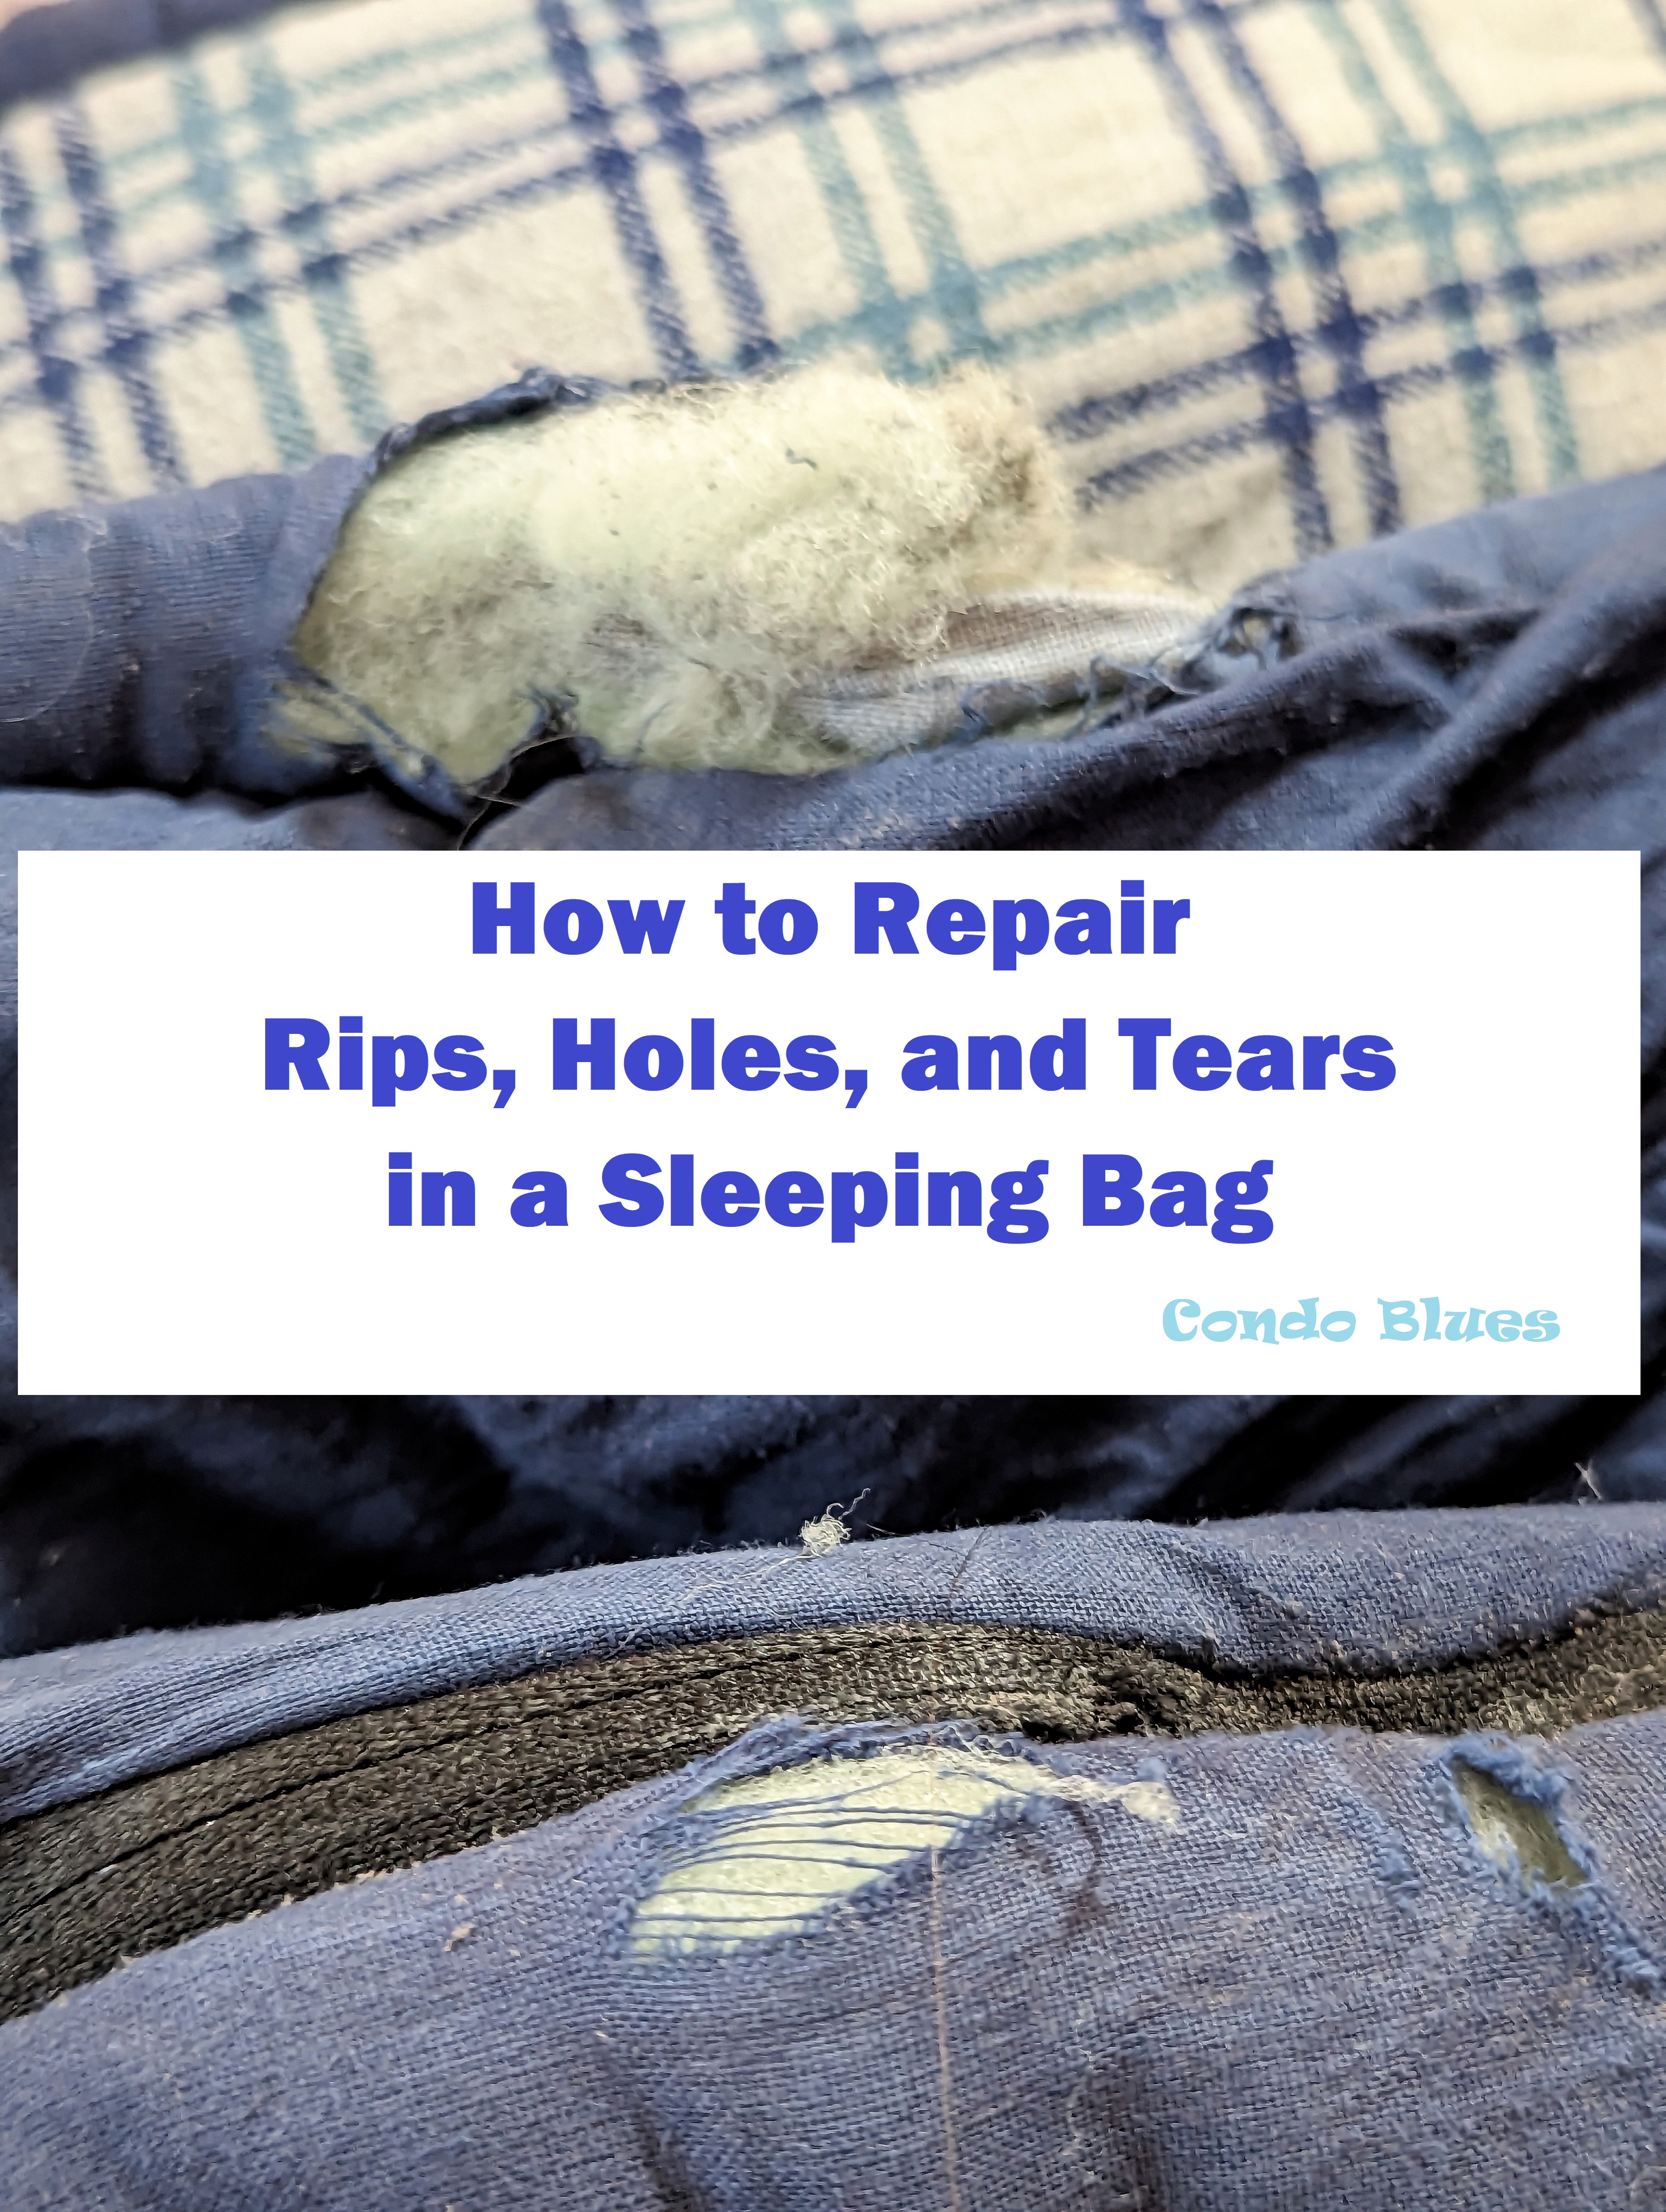 Condo Blues: How to Repair Rips, Tears, and Holes in a Sleeping Bag